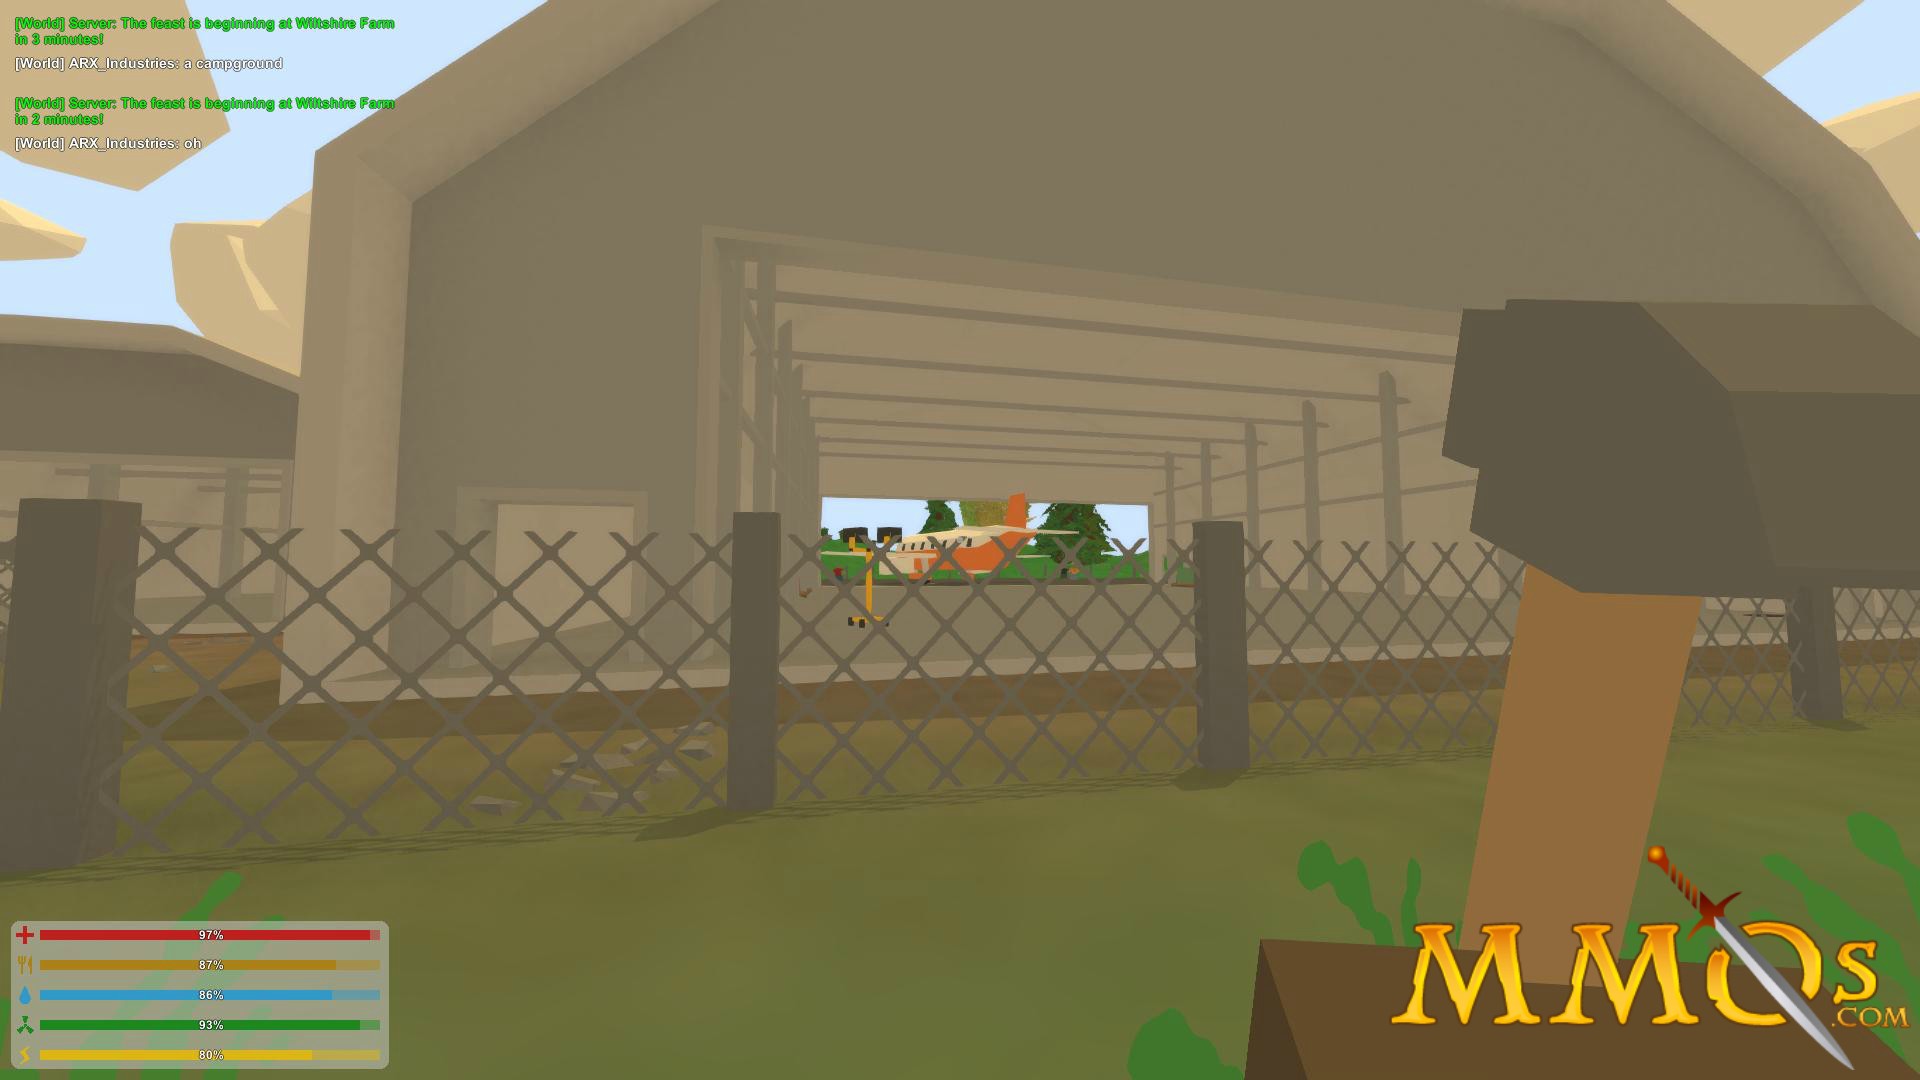 MGT] Unturned - Roblox X DayZ - Past Events - Steam Gamers Community